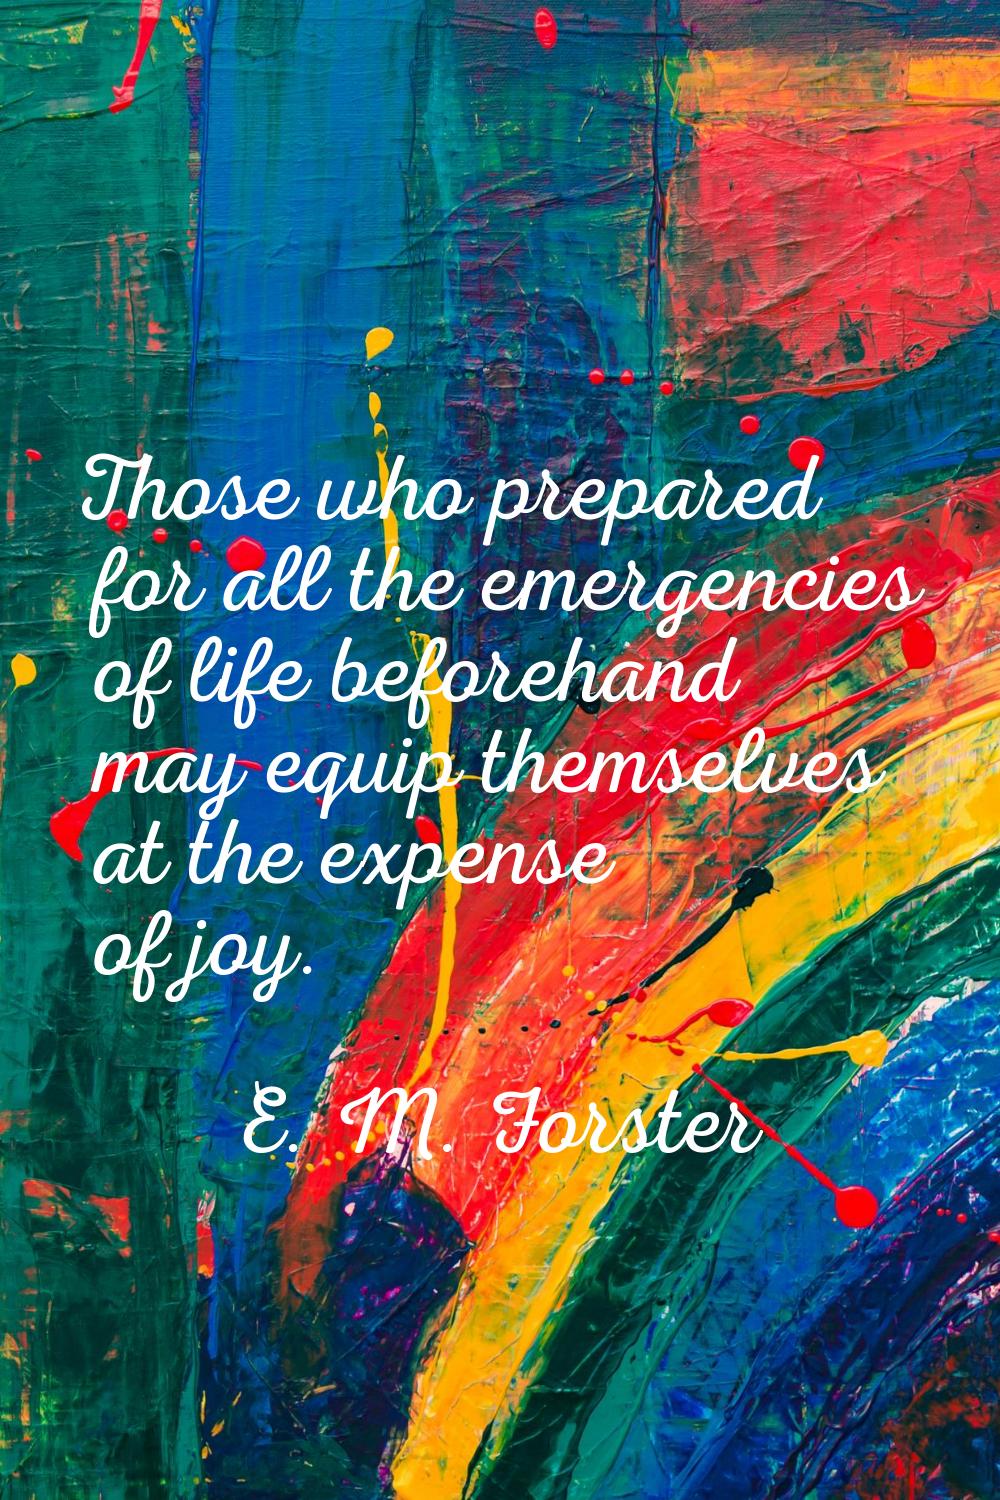 Those who prepared for all the emergencies of life beforehand may equip themselves at the expense o